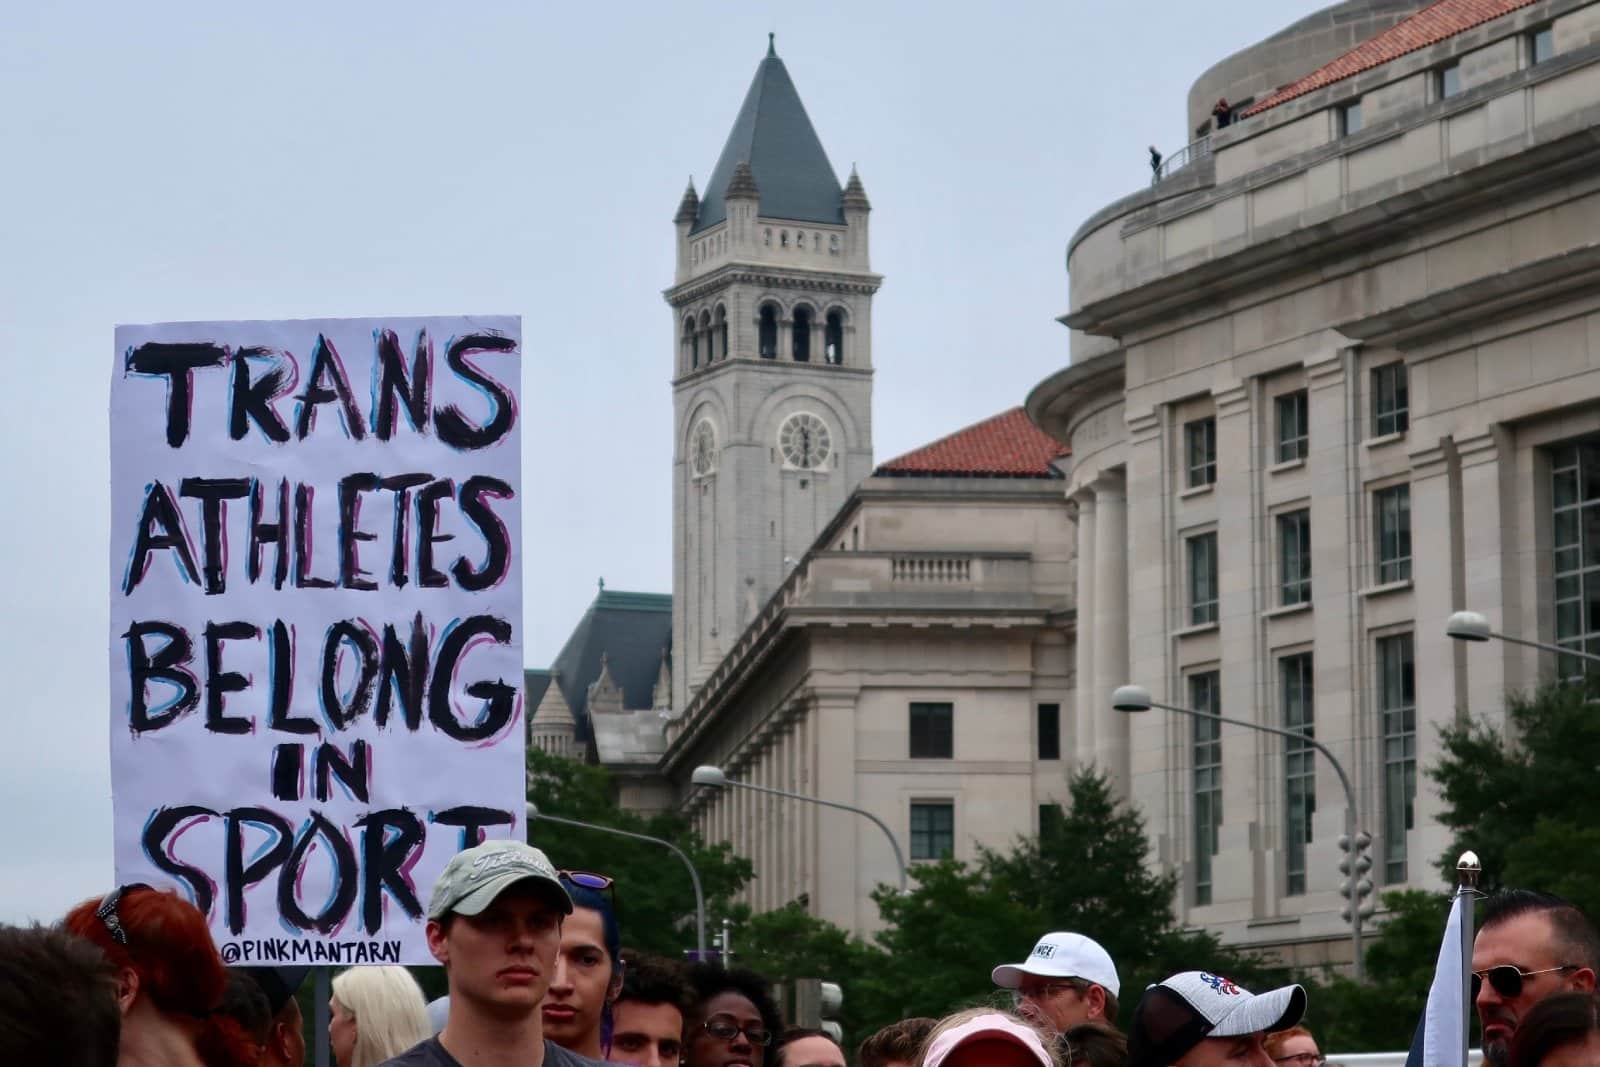 Image Credit: Shutterstock / DCStockPhotography <p><span>Debates over transgender athletes’ participation in sports have highlighted ongoing discussions about inclusion, fairness, and identity in the sporting world.</span></p>